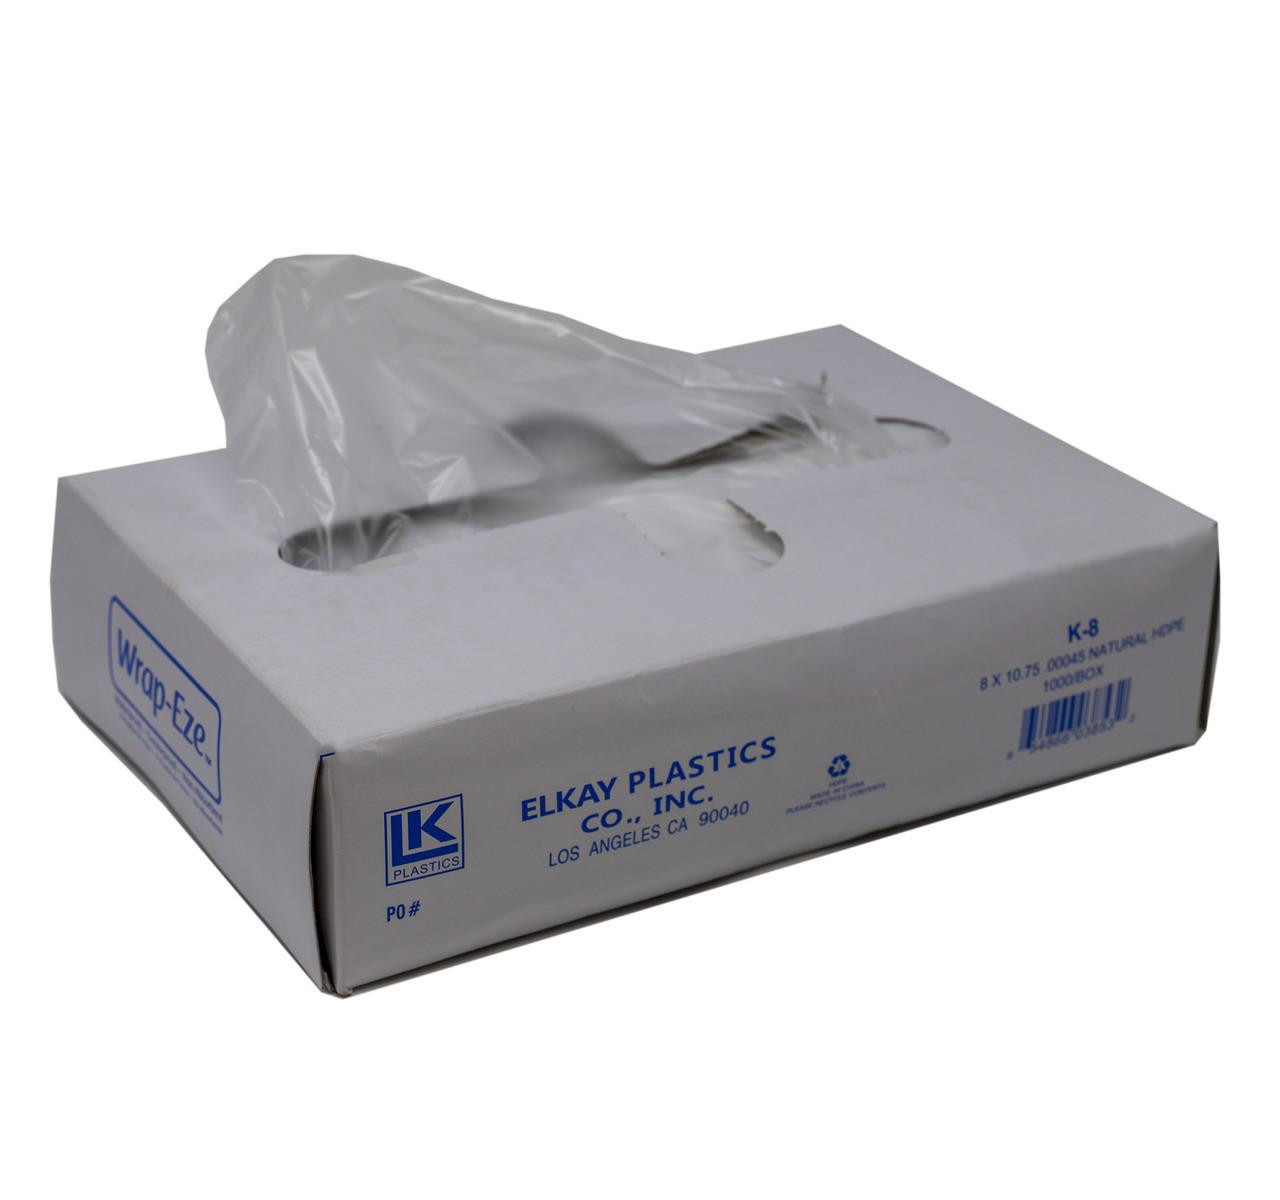 JSM White Foil Paper Cling Wrap, Packaging Type: Roll